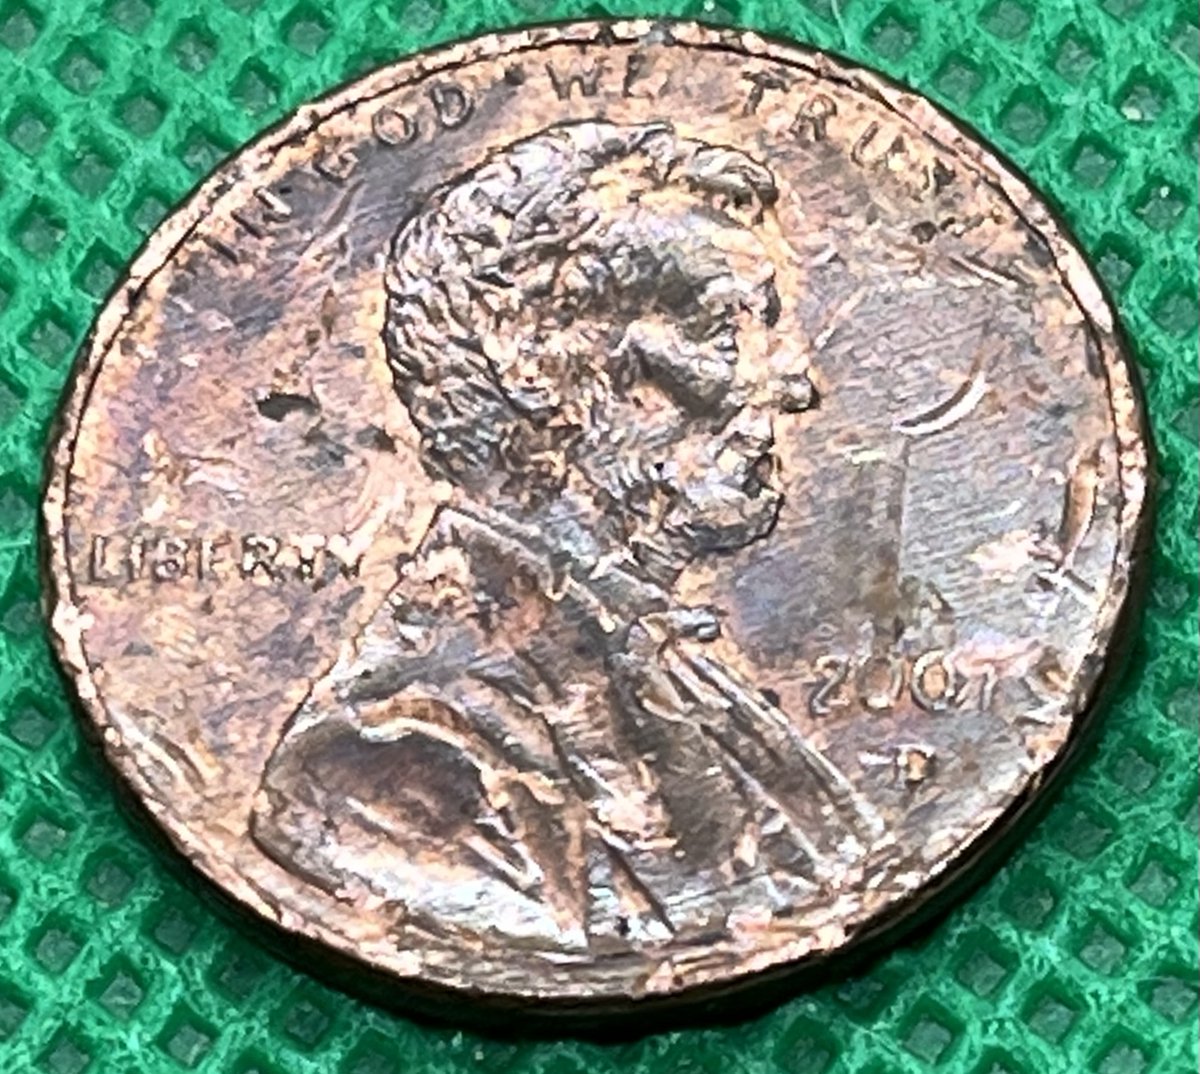 Found on the ground, Texas, April 2024. I do this as a hobby: I enjoy picking coins off the ground and recirculating them. I have relationships with banks that allow me to do that. I make a little money, but it's not close to $1 a day on average. It's sure not minimum wage.